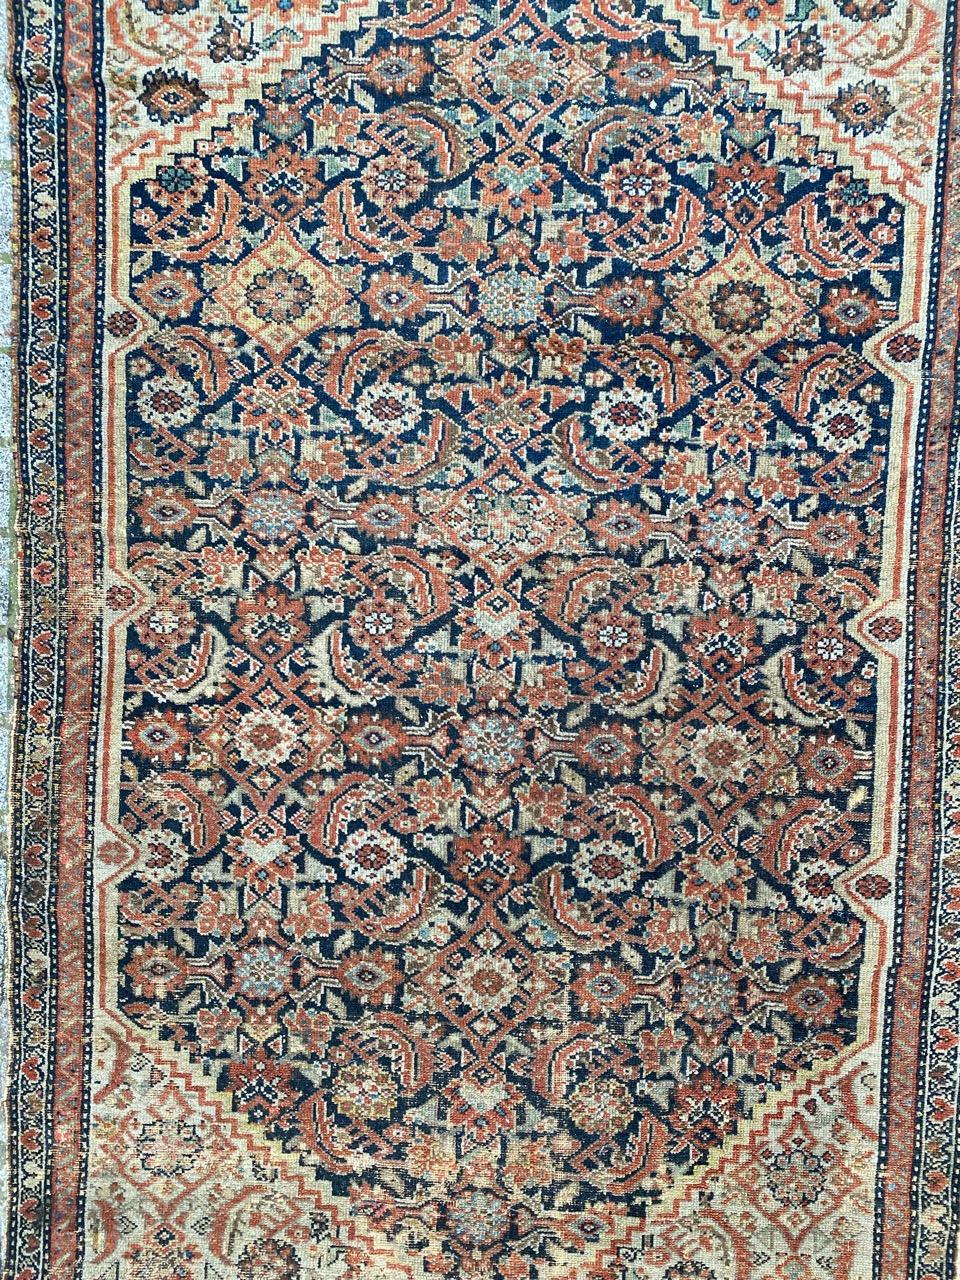 Nice late 19th century Malayer rug with beautiful herati ferahan design and nice natural colors, entirely hand knotted with wool velvet cotton foundation.

✨✨✨
